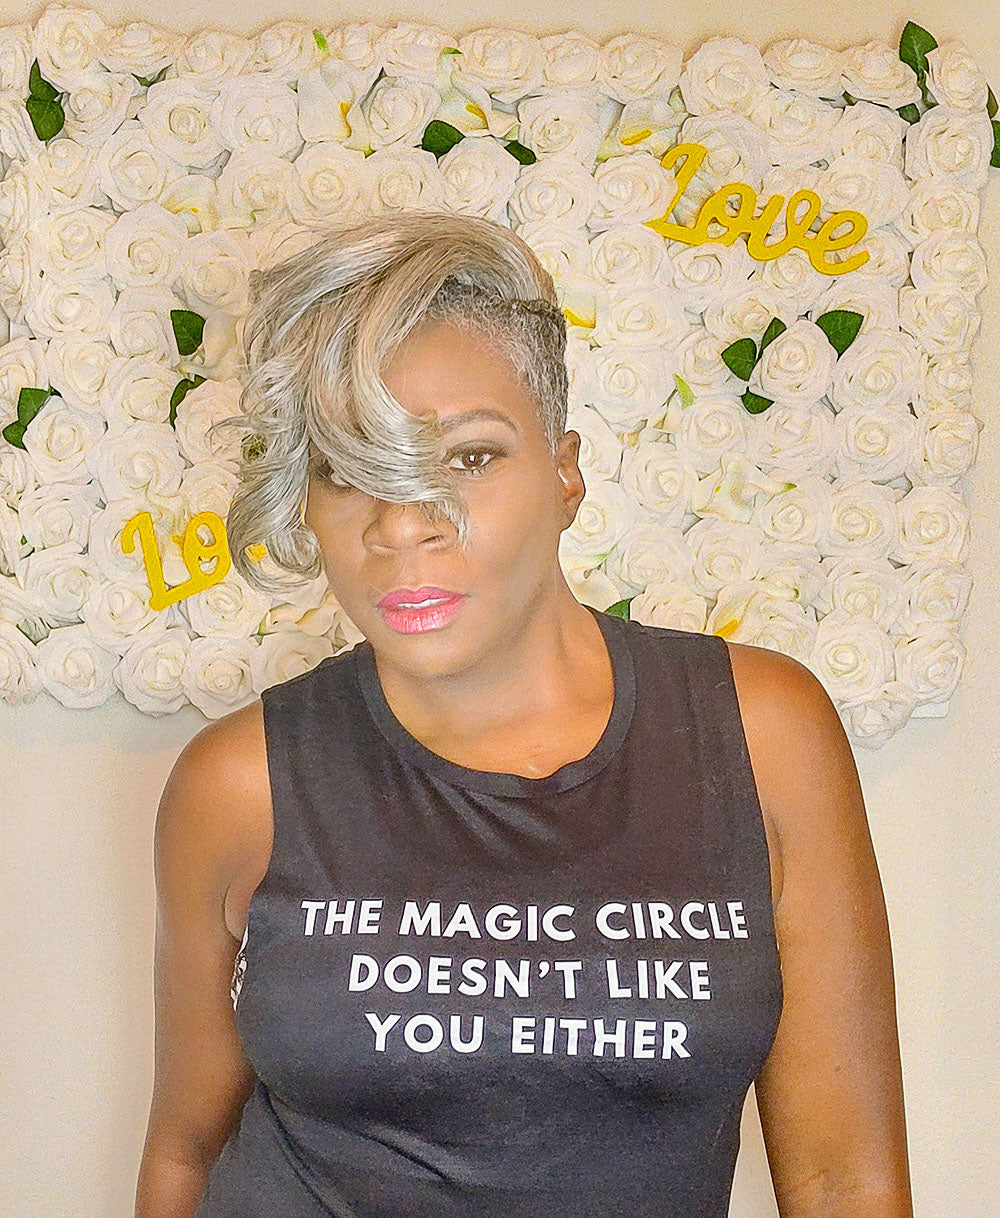 Woman wearing a black muscle tank top that says "The Magic Circle Doesn't like you either" in white all caps text.